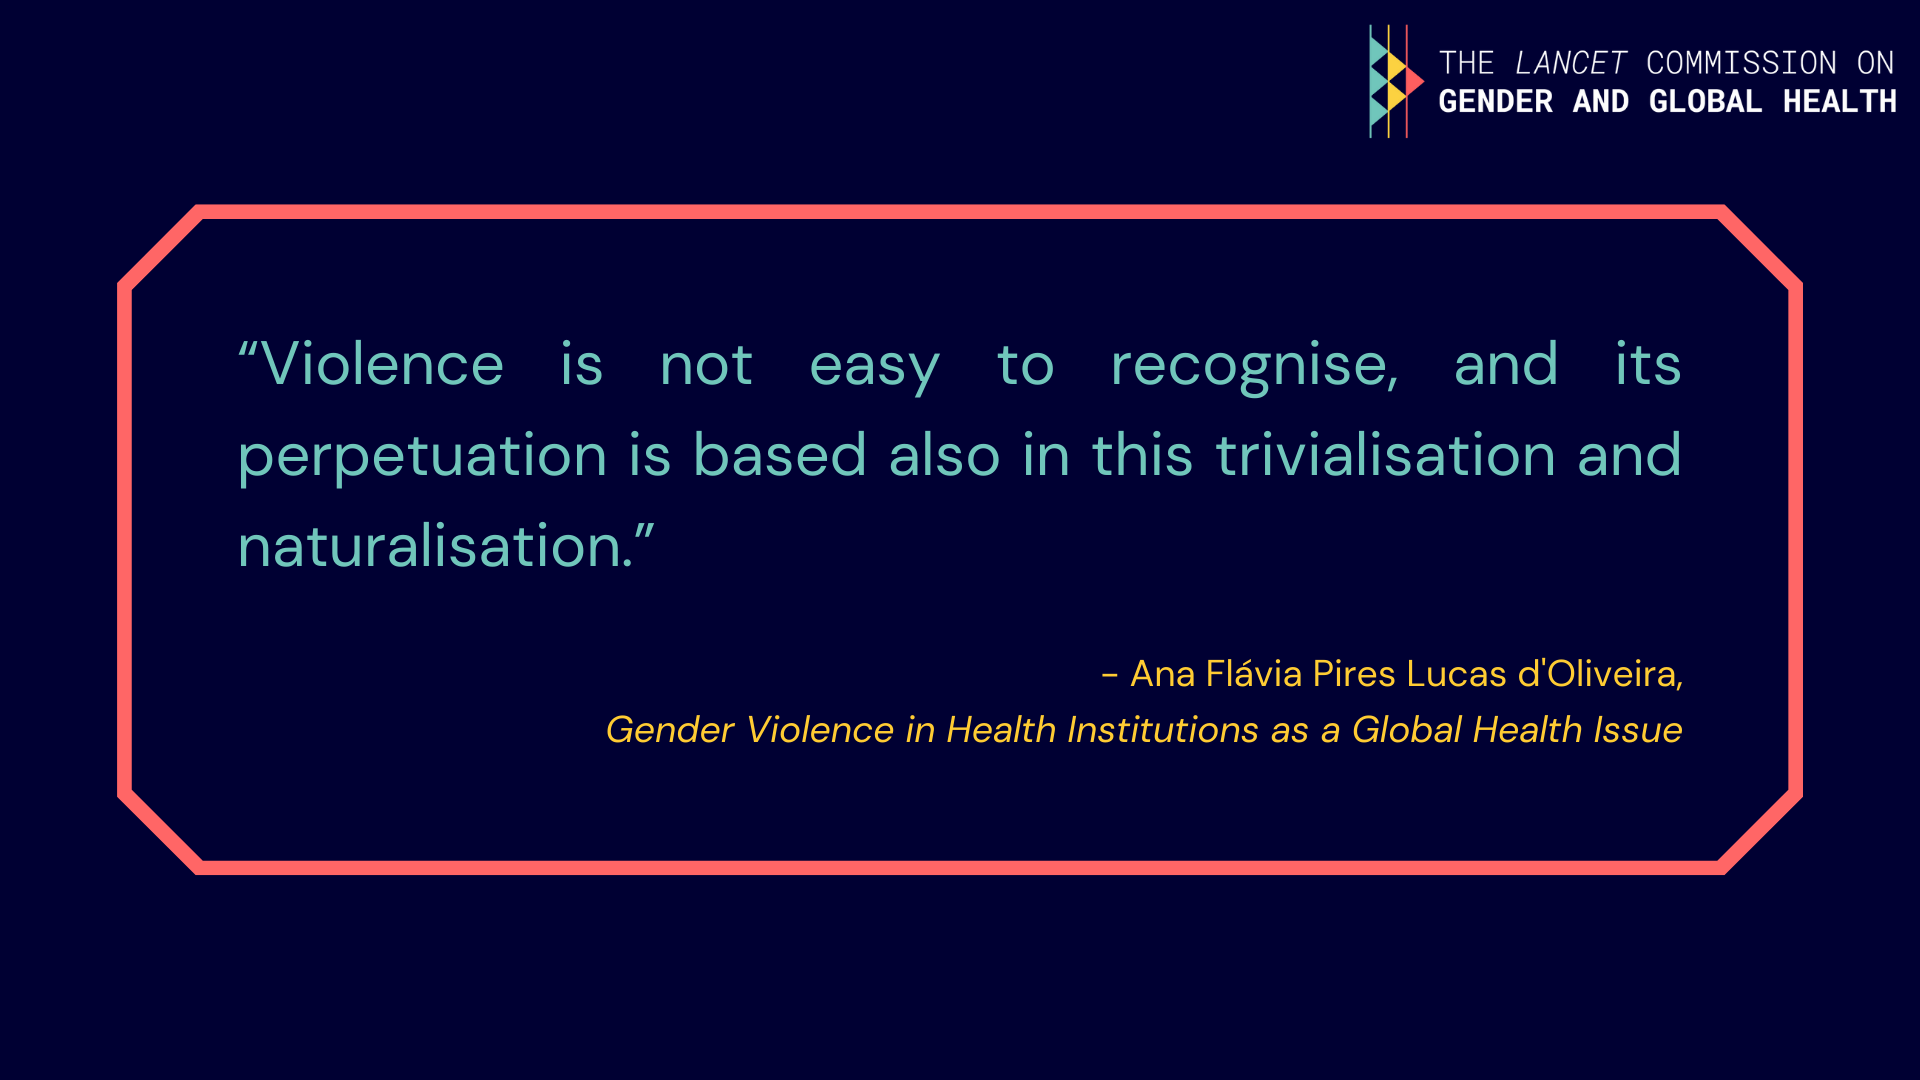 Quote by Ana Flavia: "Violence is not easy to recognise, and its perpetuation is based also in this trivialisation and naturalisation".